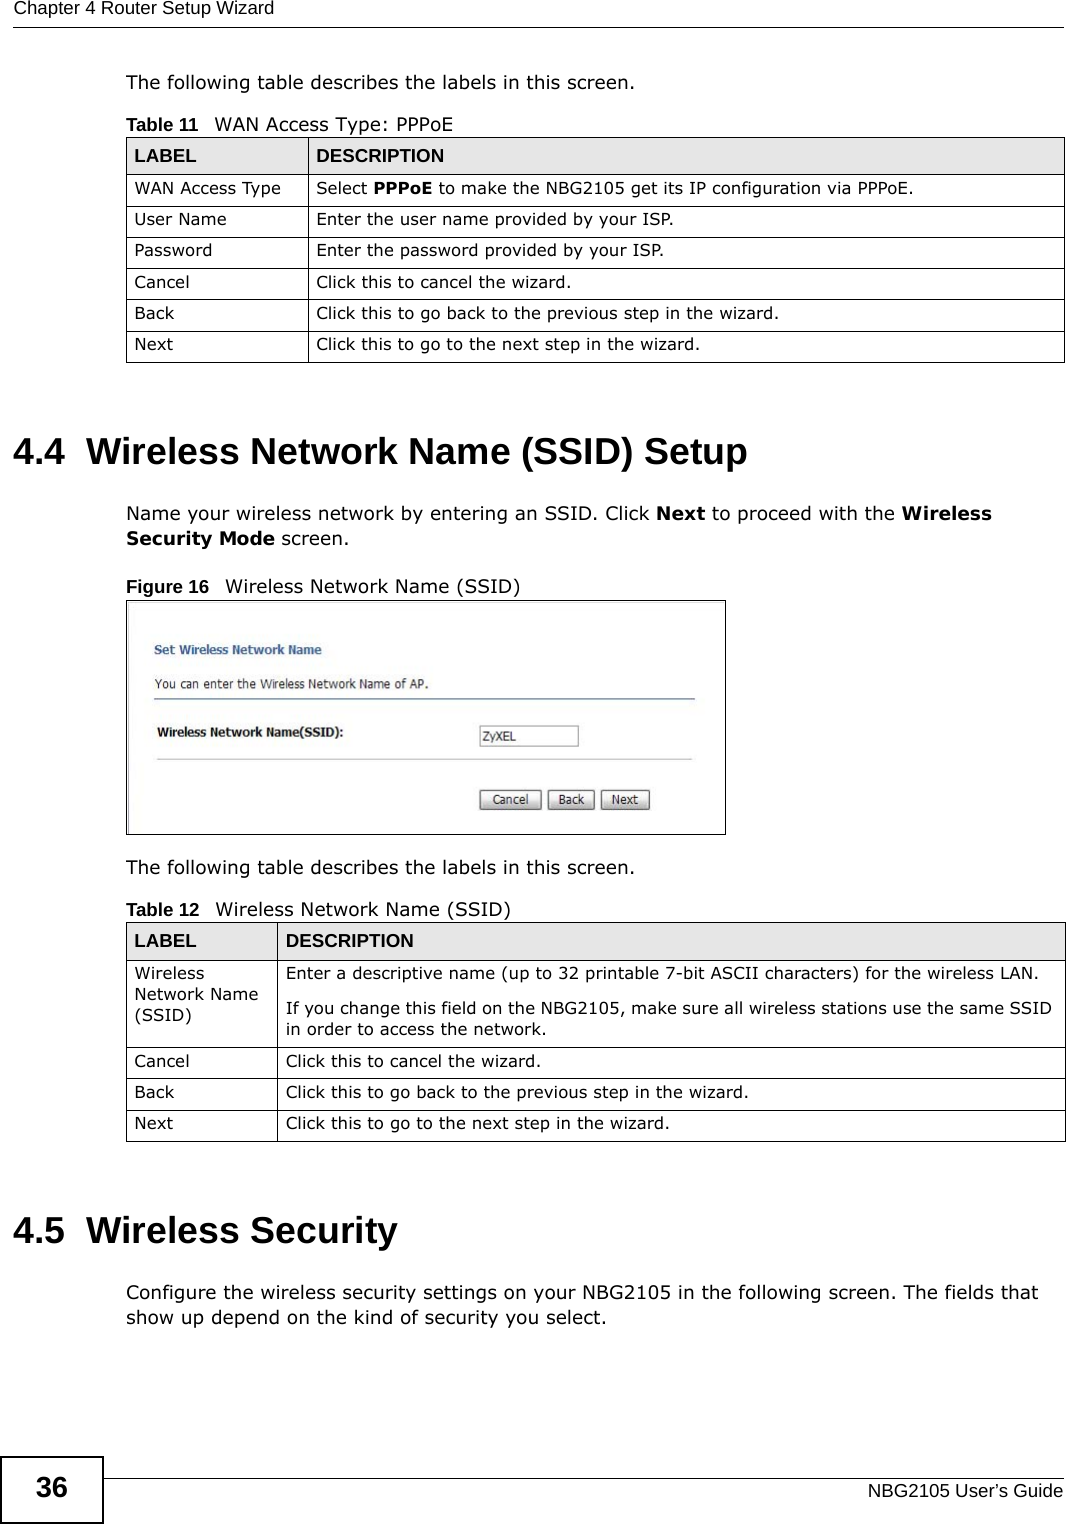 Chapter 4 Router Setup WizardNBG2105 User’s Guide36The following table describes the labels in this screen.4.4  Wireless Network Name (SSID) SetupName your wireless network by entering an SSID. Click Next to proceed with the Wireless Security Mode screen.Figure 16   Wireless Network Name (SSID) The following table describes the labels in this screen.4.5  Wireless SecurityConfigure the wireless security settings on your NBG2105 in the following screen. The fields that show up depend on the kind of security you select.Table 11   WAN Access Type: PPPoELABEL DESCRIPTIONWAN Access Type Select PPPoE to make the NBG2105 get its IP configuration via PPPoE.User Name Enter the user name provided by your ISP.Password Enter the password provided by your ISP.Cancel Click this to cancel the wizard.Back Click this to go back to the previous step in the wizard.Next Click this to go to the next step in the wizard.Table 12   Wireless Network Name (SSID)LABEL DESCRIPTIONWireless Network Name (SSID)Enter a descriptive name (up to 32 printable 7-bit ASCII characters) for the wireless LAN. If you change this field on the NBG2105, make sure all wireless stations use the same SSID in order to access the network. Cancel Click this to cancel the wizard.Back Click this to go back to the previous step in the wizard.Next Click this to go to the next step in the wizard.